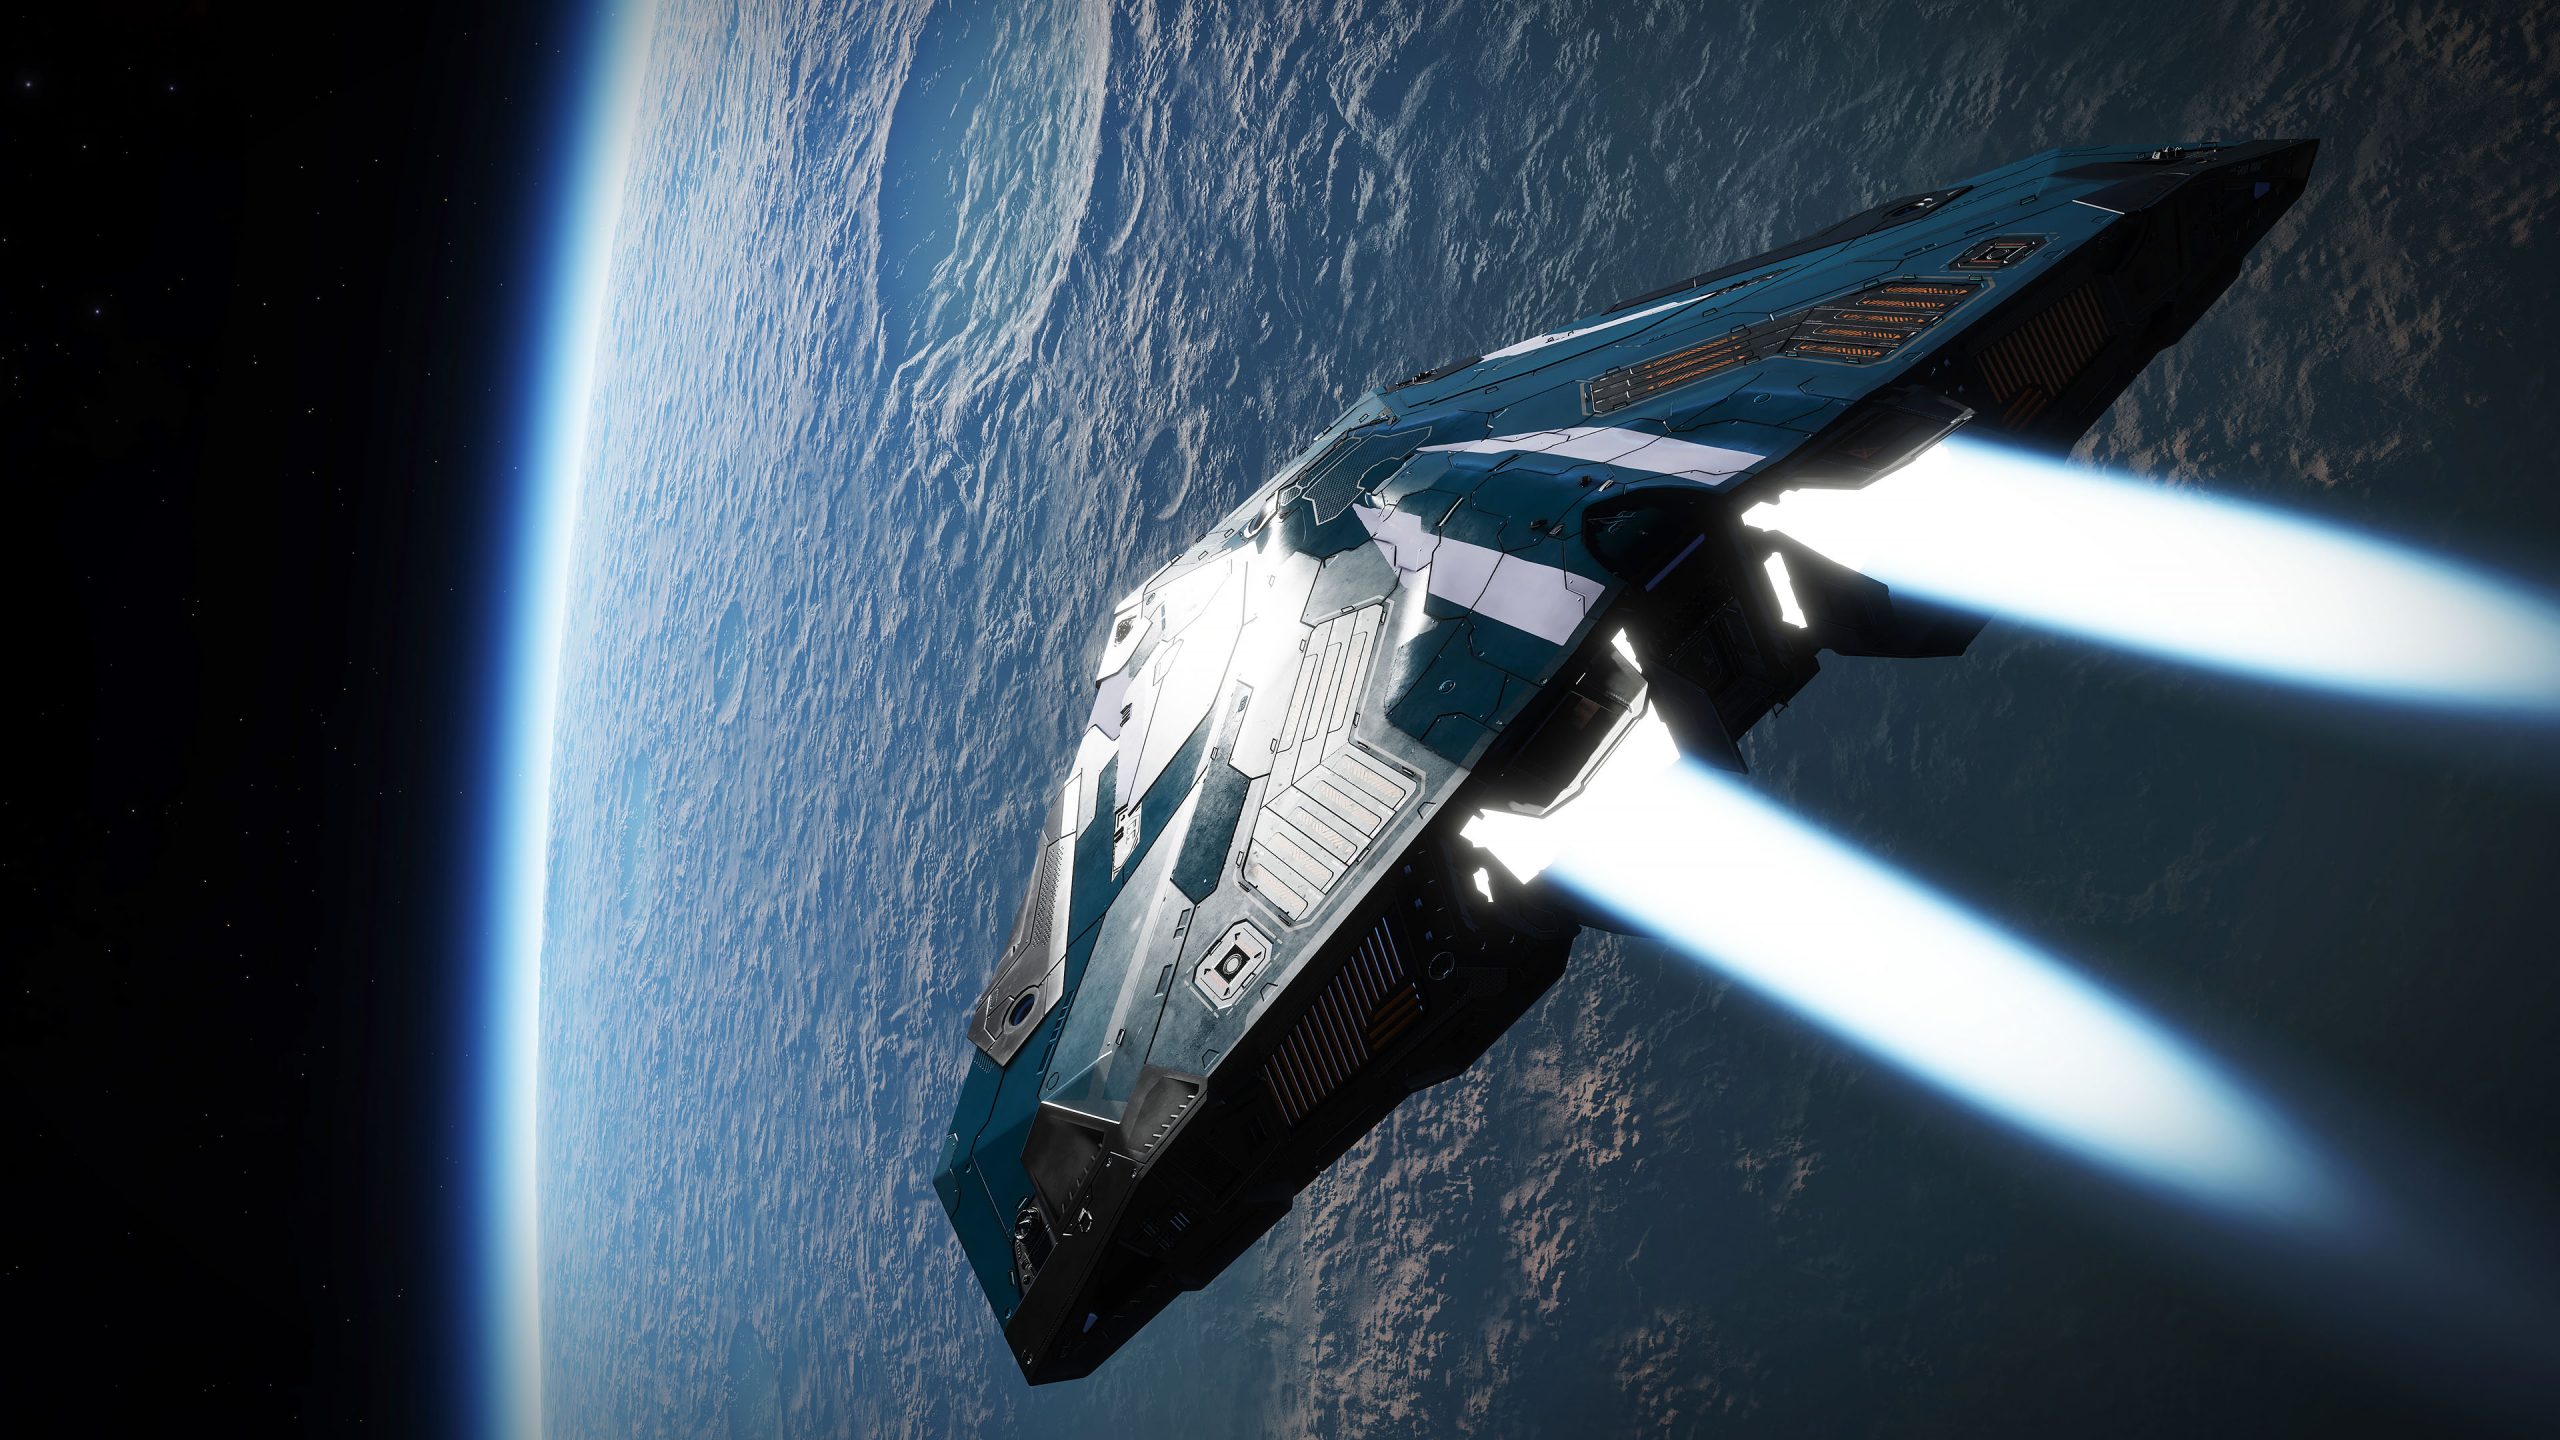 ‘The galaxy won’t be the same’ after Elite Dangerous Update 14, say devs